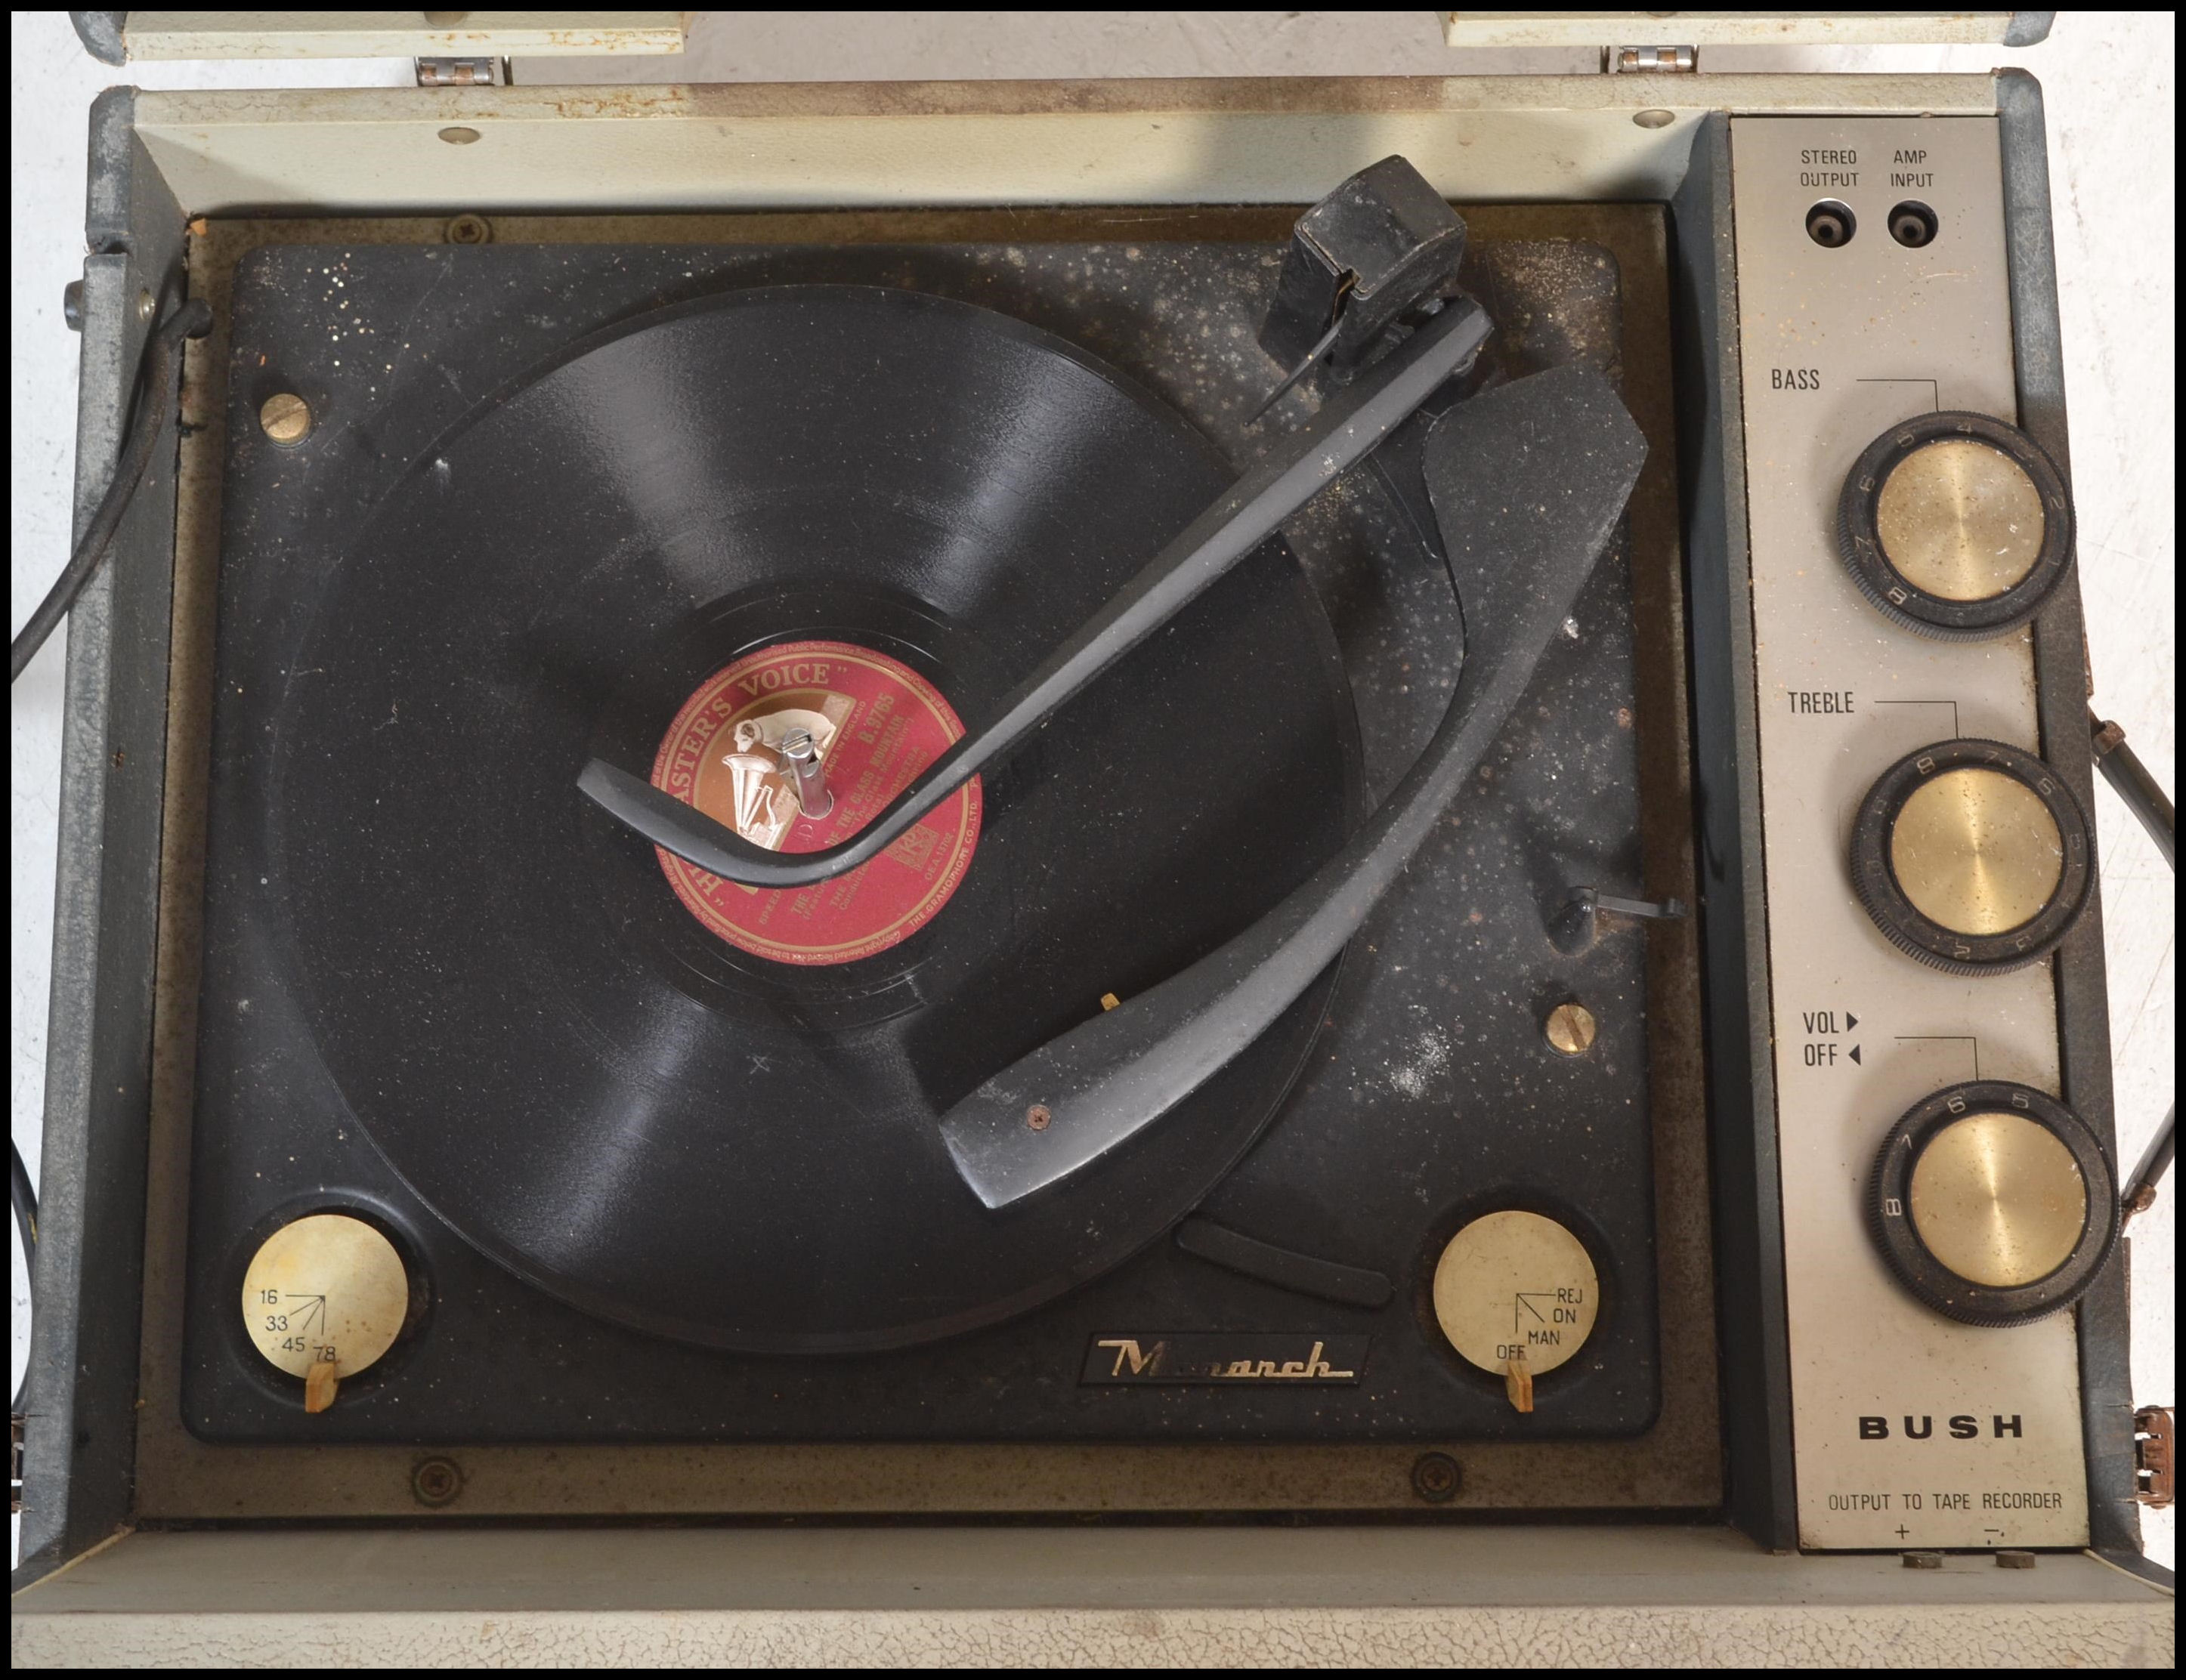 A vintage 20th Century portable record player by Bush, fitted with a four speed record deck by - Image 5 of 8